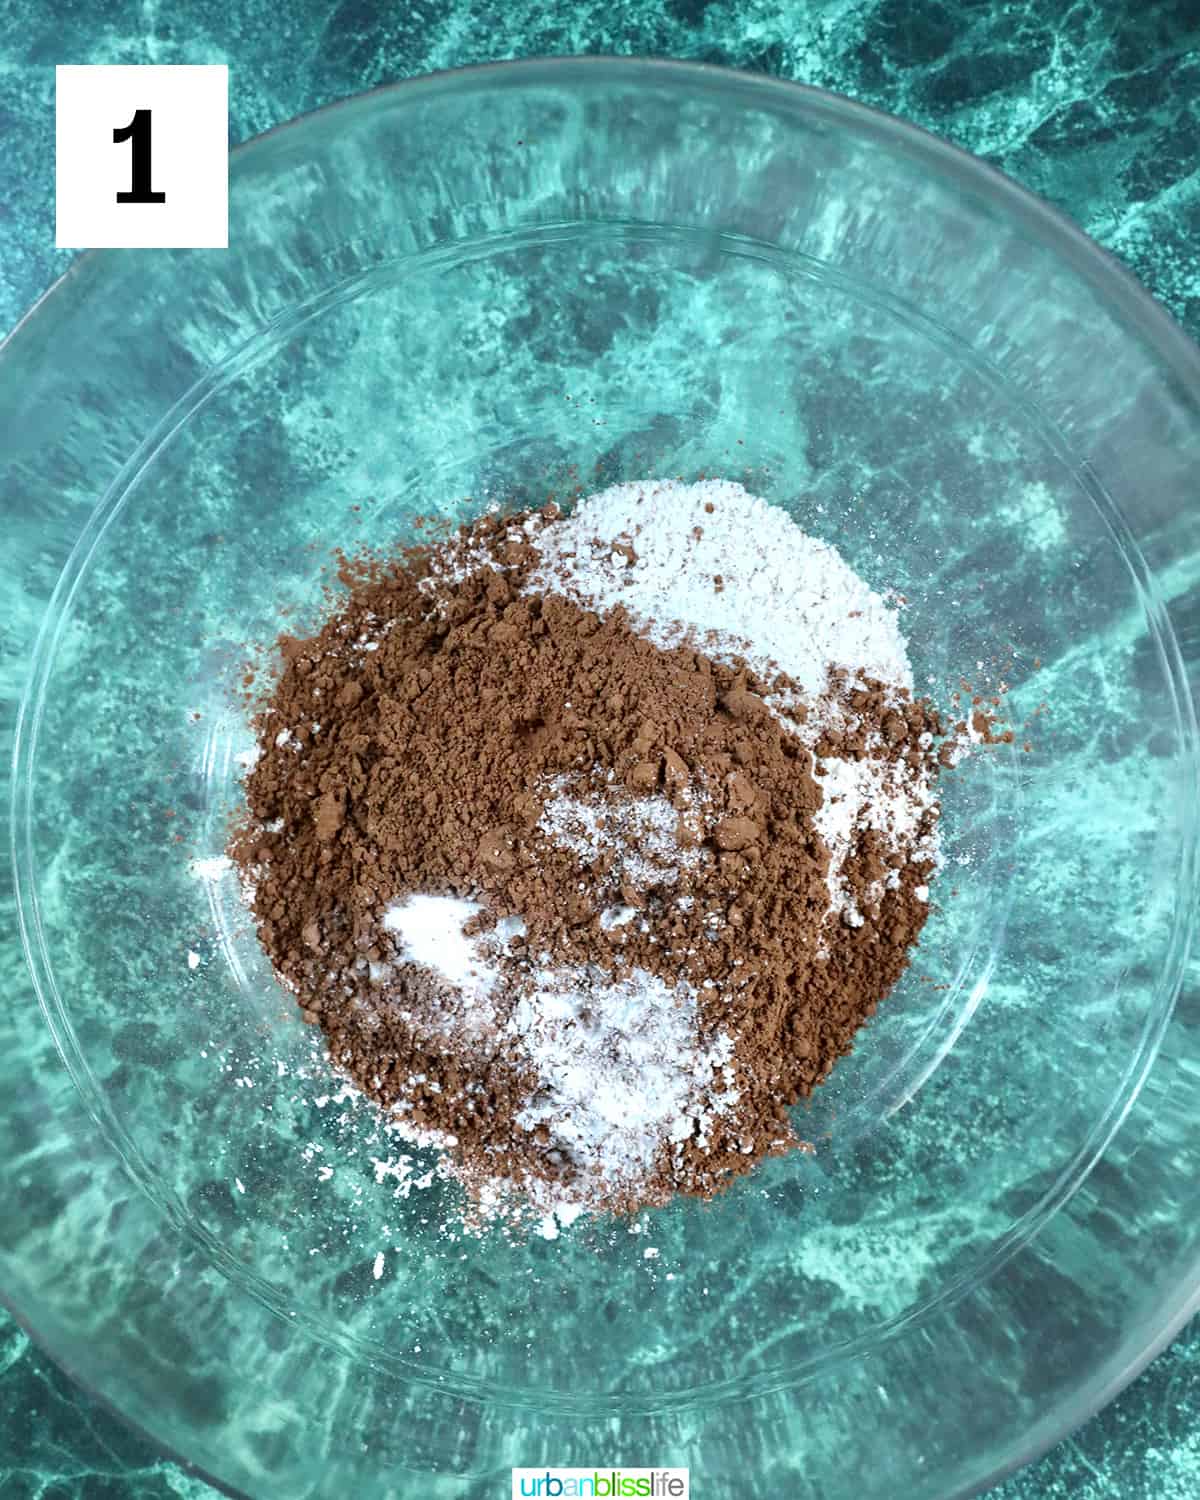 cocoa powder and other dry ingredients in a bowl to make chocolate cupcakes.